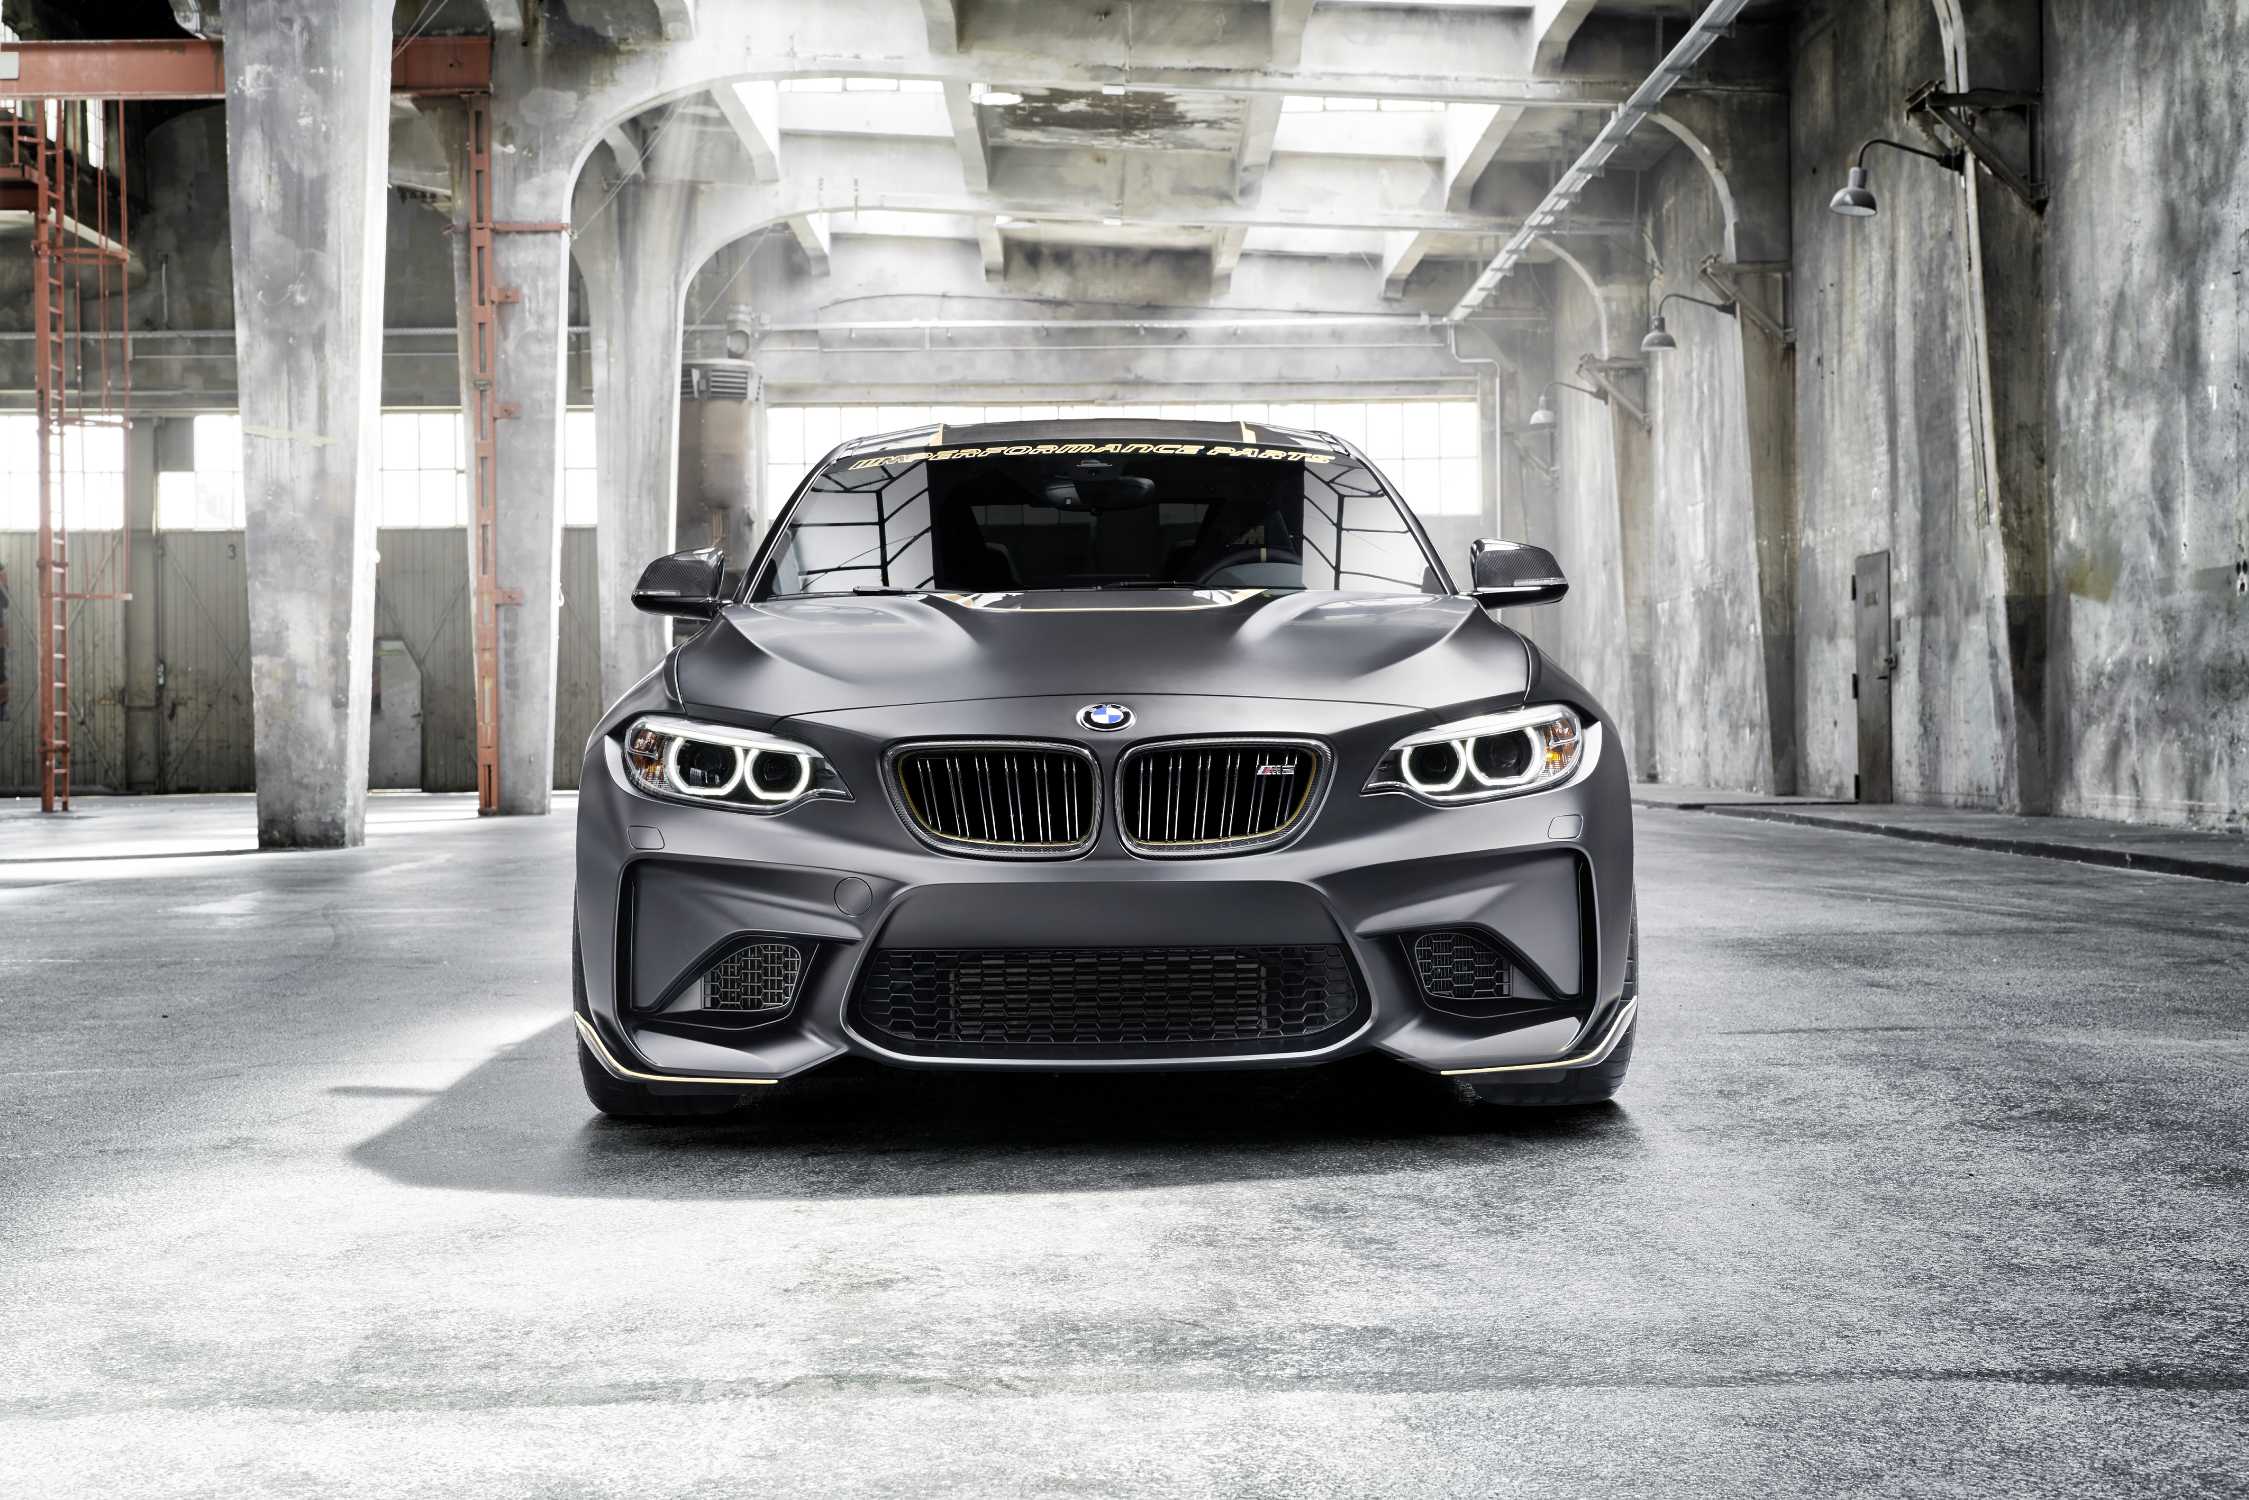 World premiere and dynamic appearance of the BMW M Performance Parts  Concept in Goodwood.